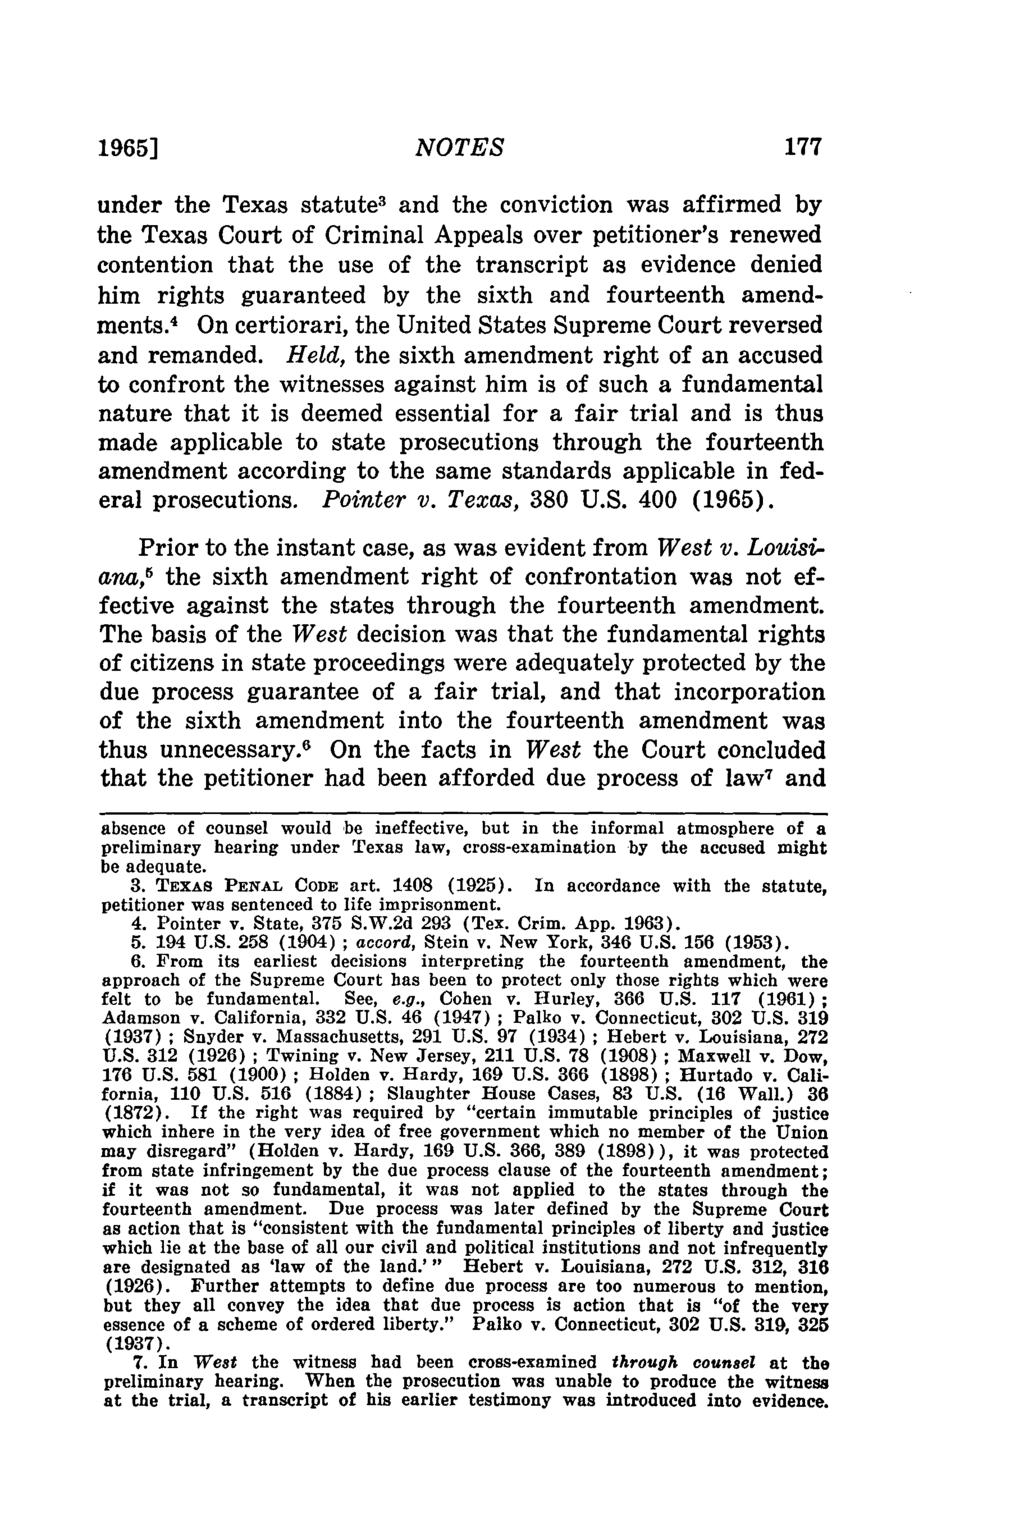 1965] NOTES under the Texas statute 3 and the conviction was affirmed by the Texas Court of Criminal Appeals over petitioner's renewed contention that the use of the transcript as evidence denied him